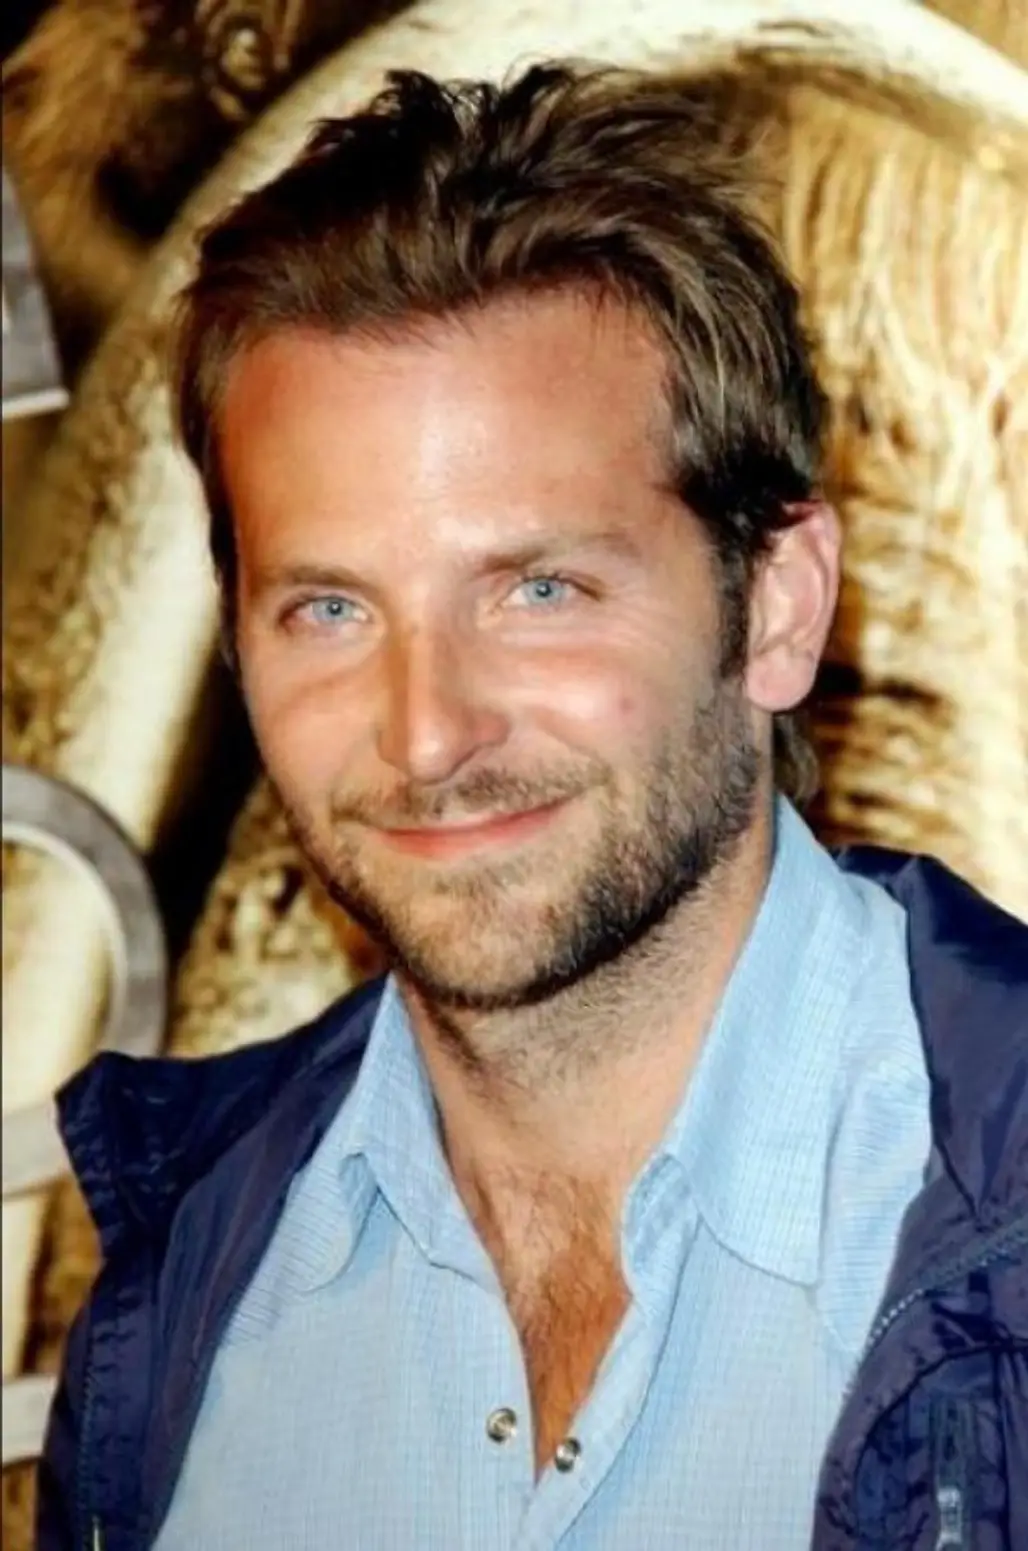 Bradley Cooper Clothes the Homeless